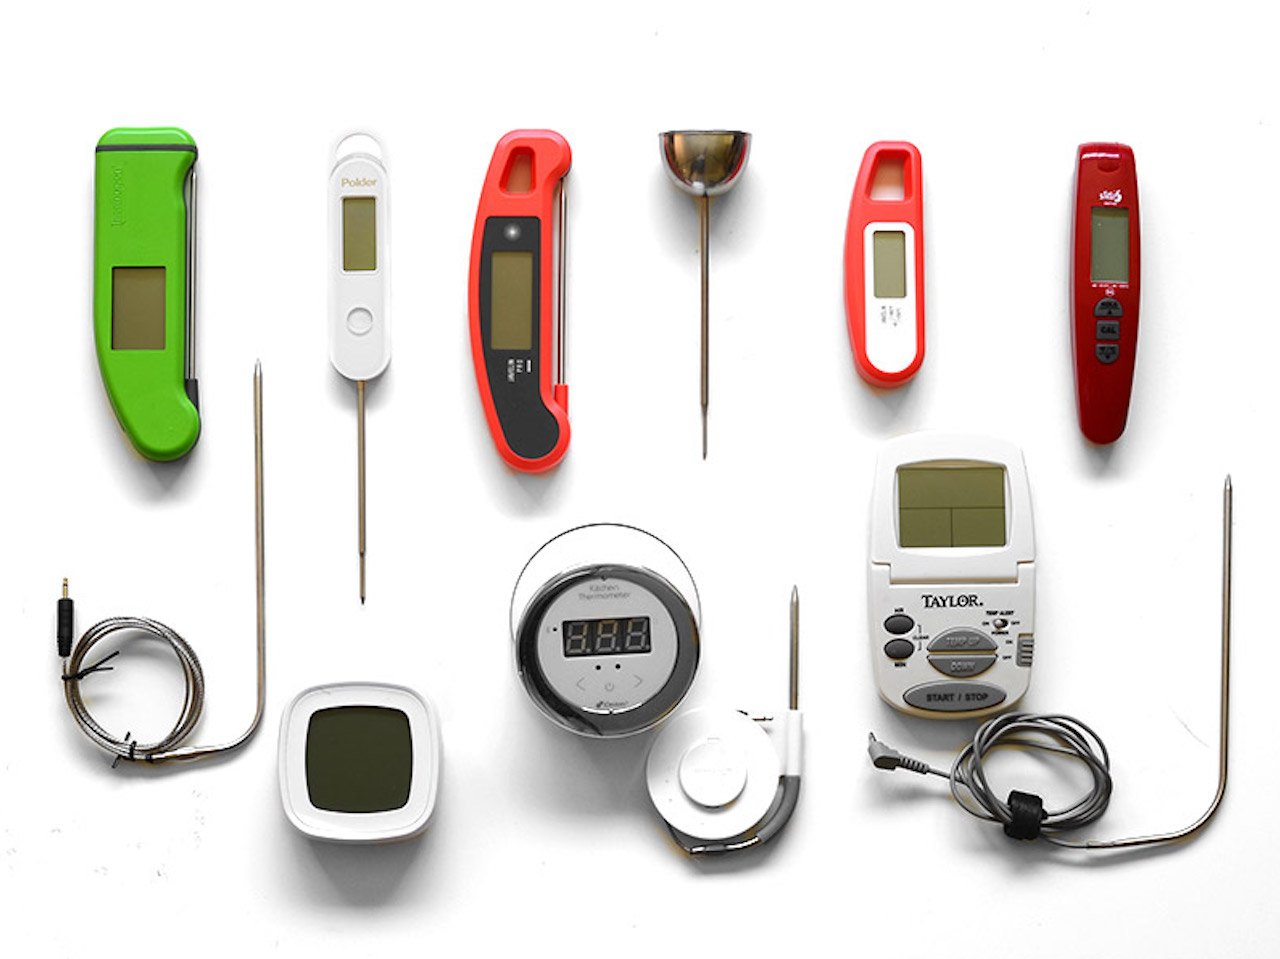 meat thermometers on a white background